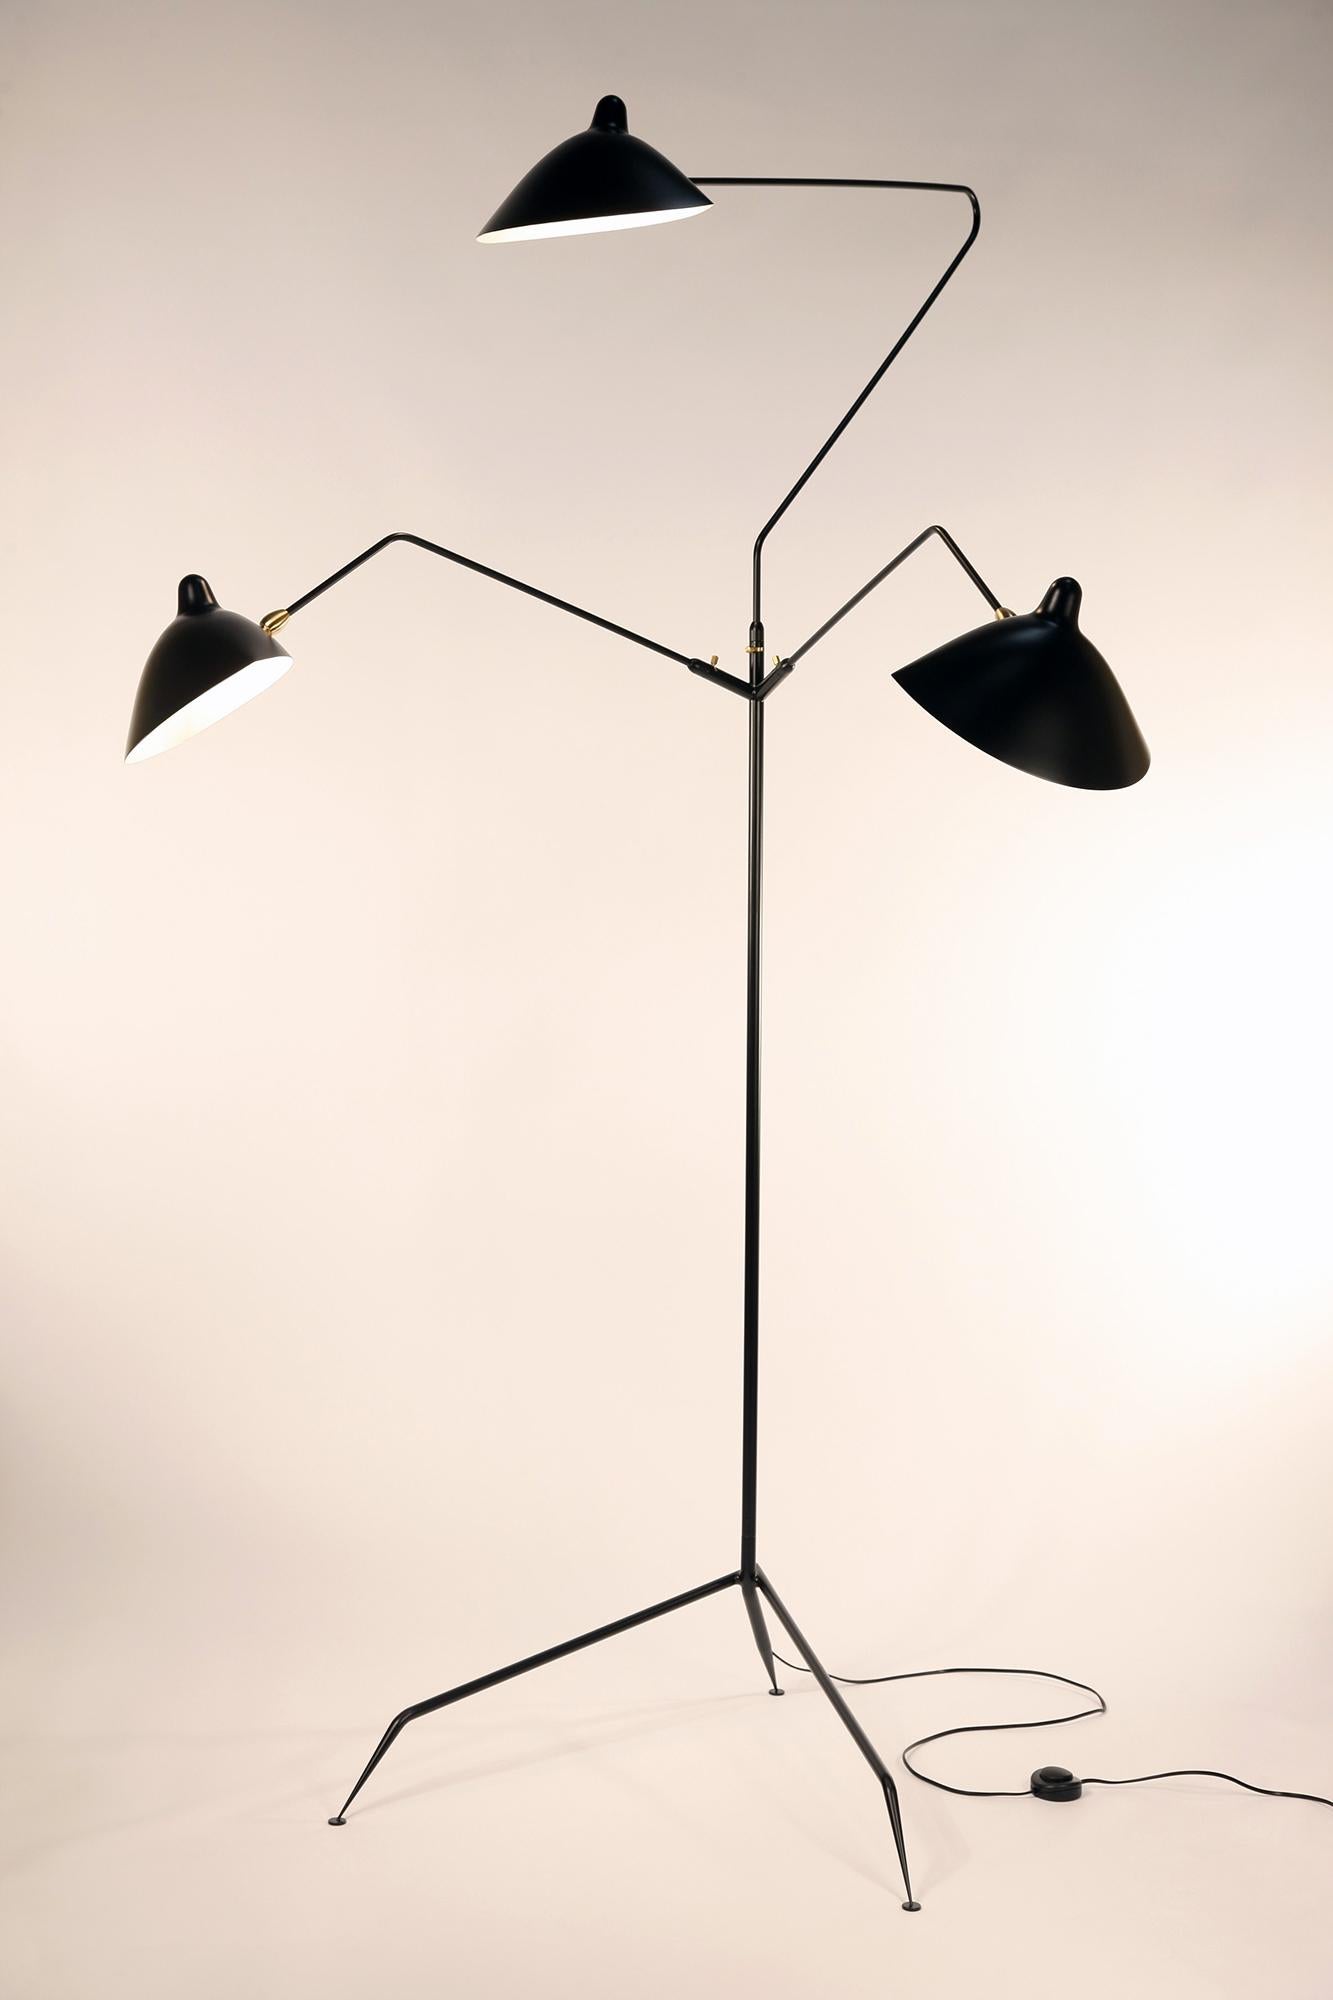 DESCRIPTION: 
This is the most versatile lamp of the Mouille collection. Each ‘chapeau’ shade can be oriented differently. Sculptural in form with three rotating arms, it stands majestically on a tripod base ending with tapered legs. 

COLOR